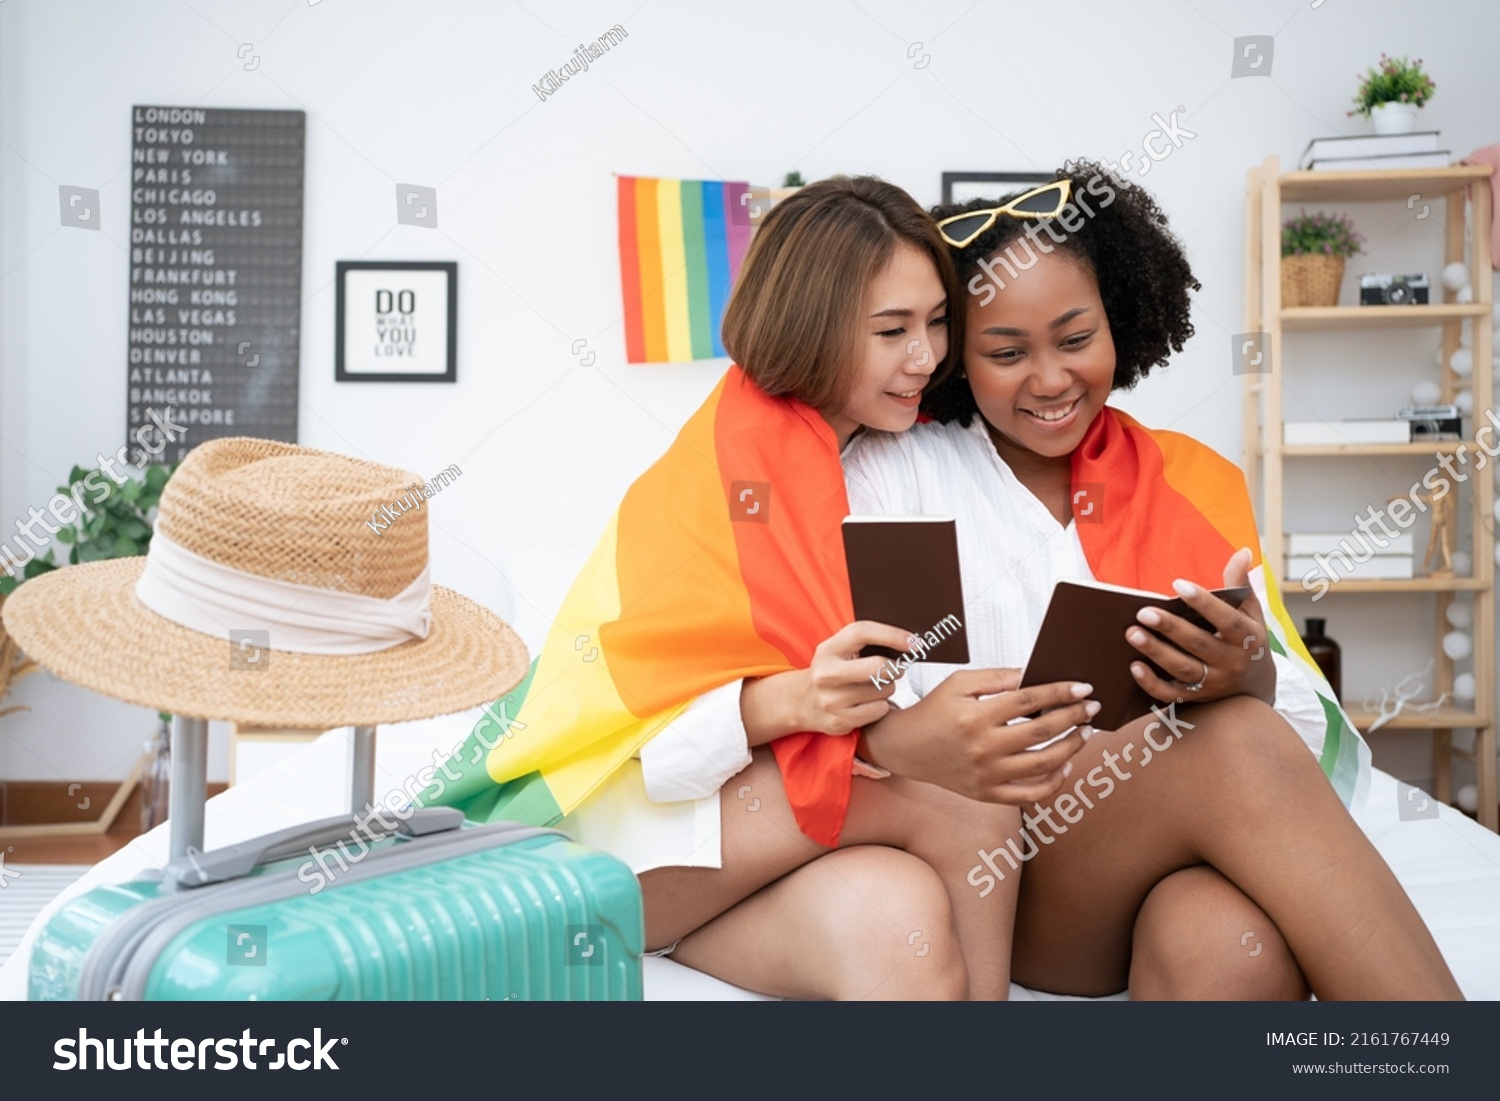 Diversity African American and Asian Married couples Lesbian LGBTQ. Married homosexual show their passports to prepare for a trip together.Sexual equality,LGBT Pride month,Parade celebrations concept. #2161767449